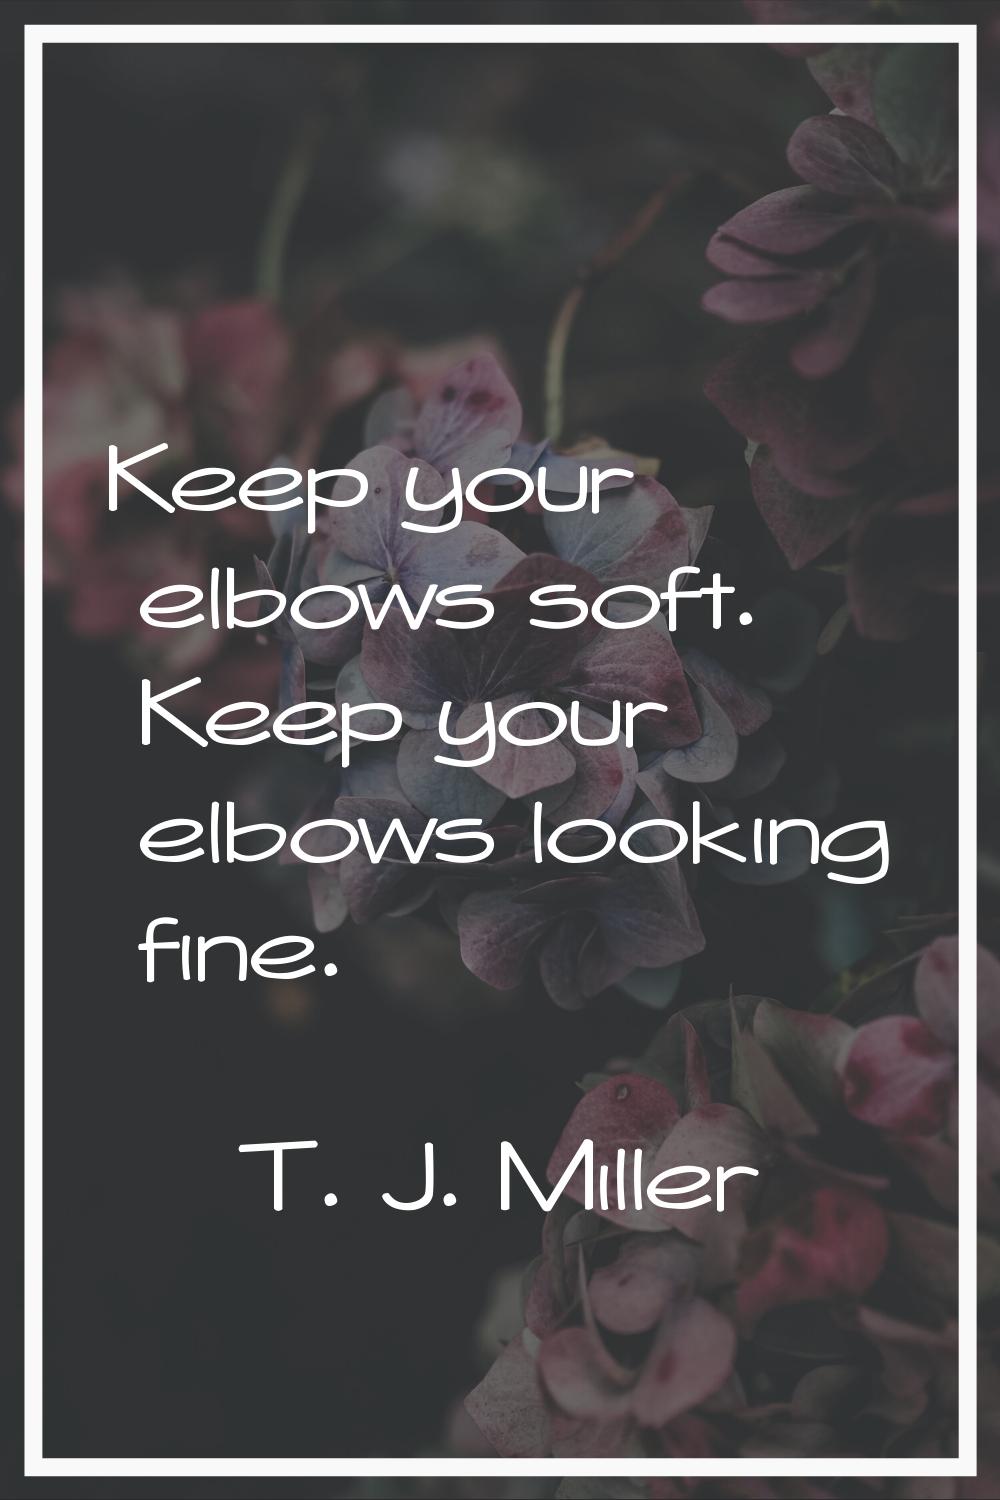 Keep your elbows soft. Keep your elbows looking fine.